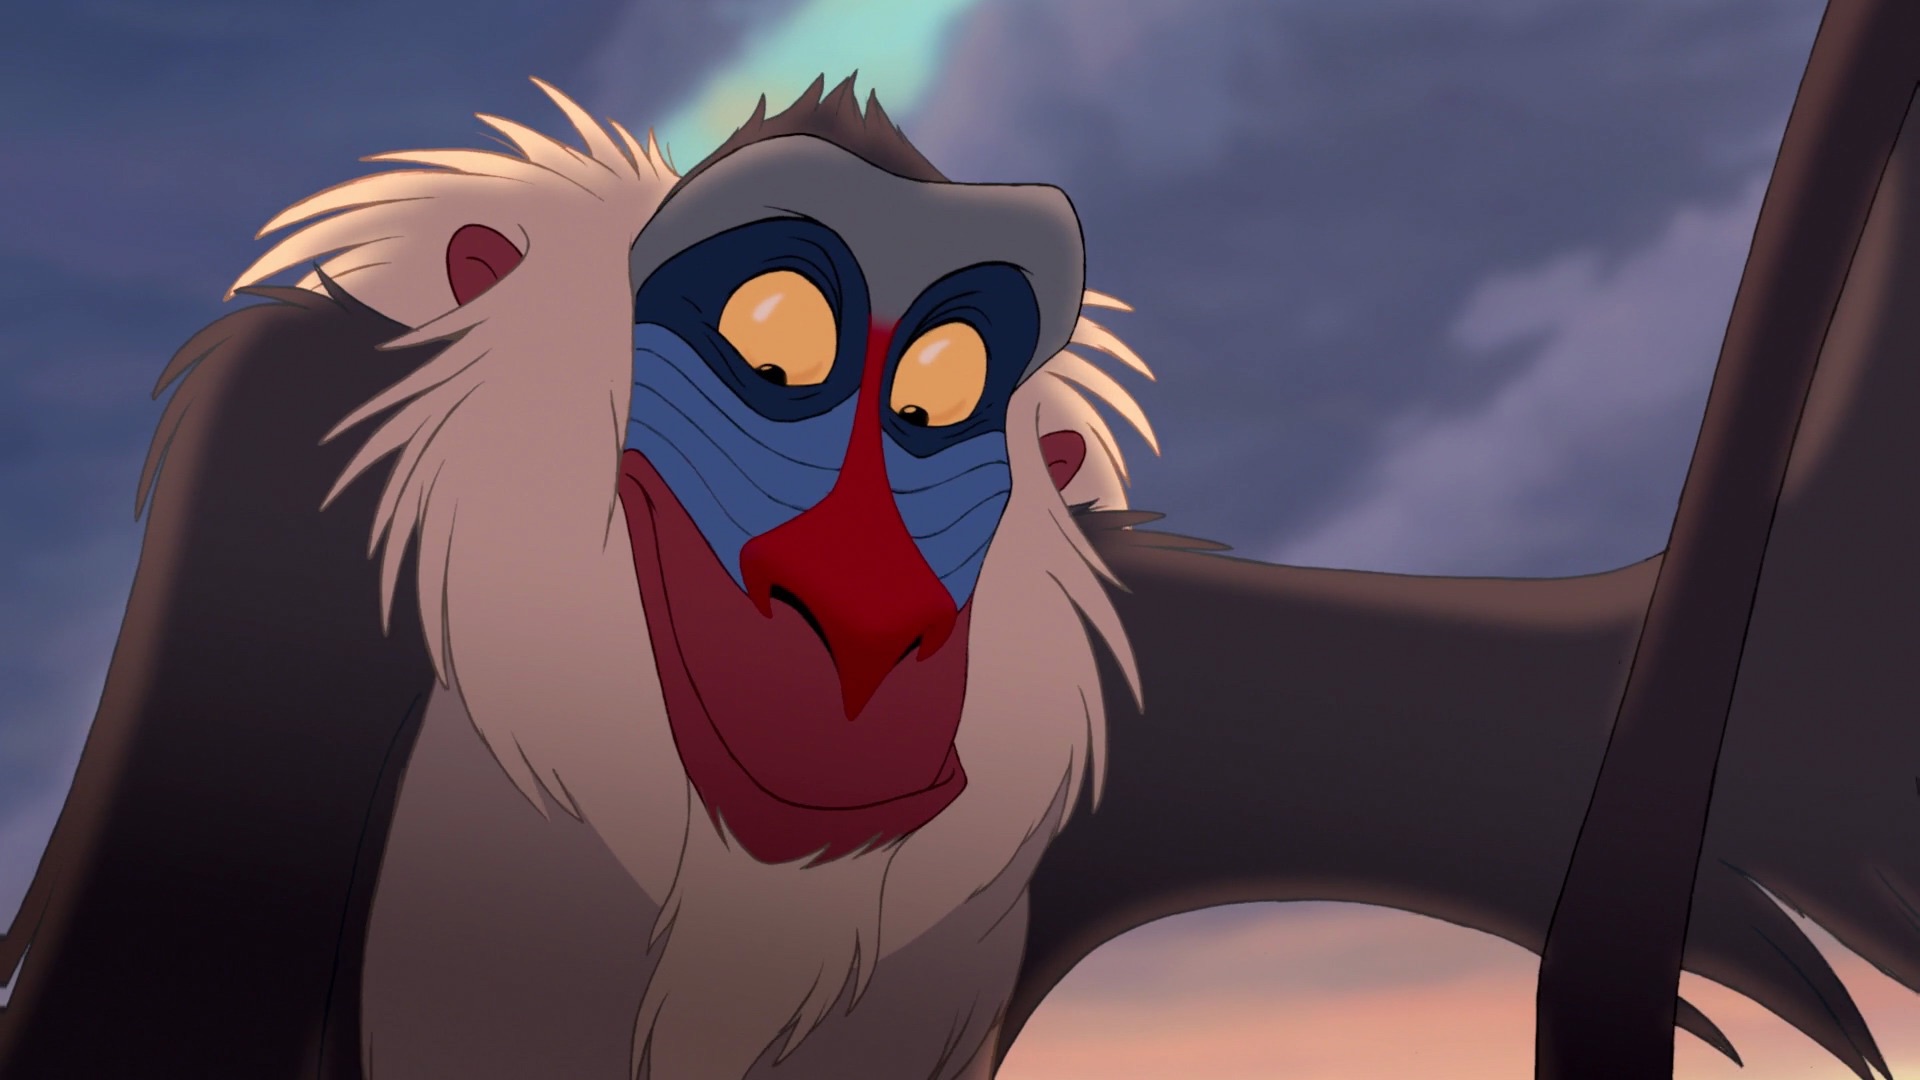 A scene from The Lion King | Lion King Trivia